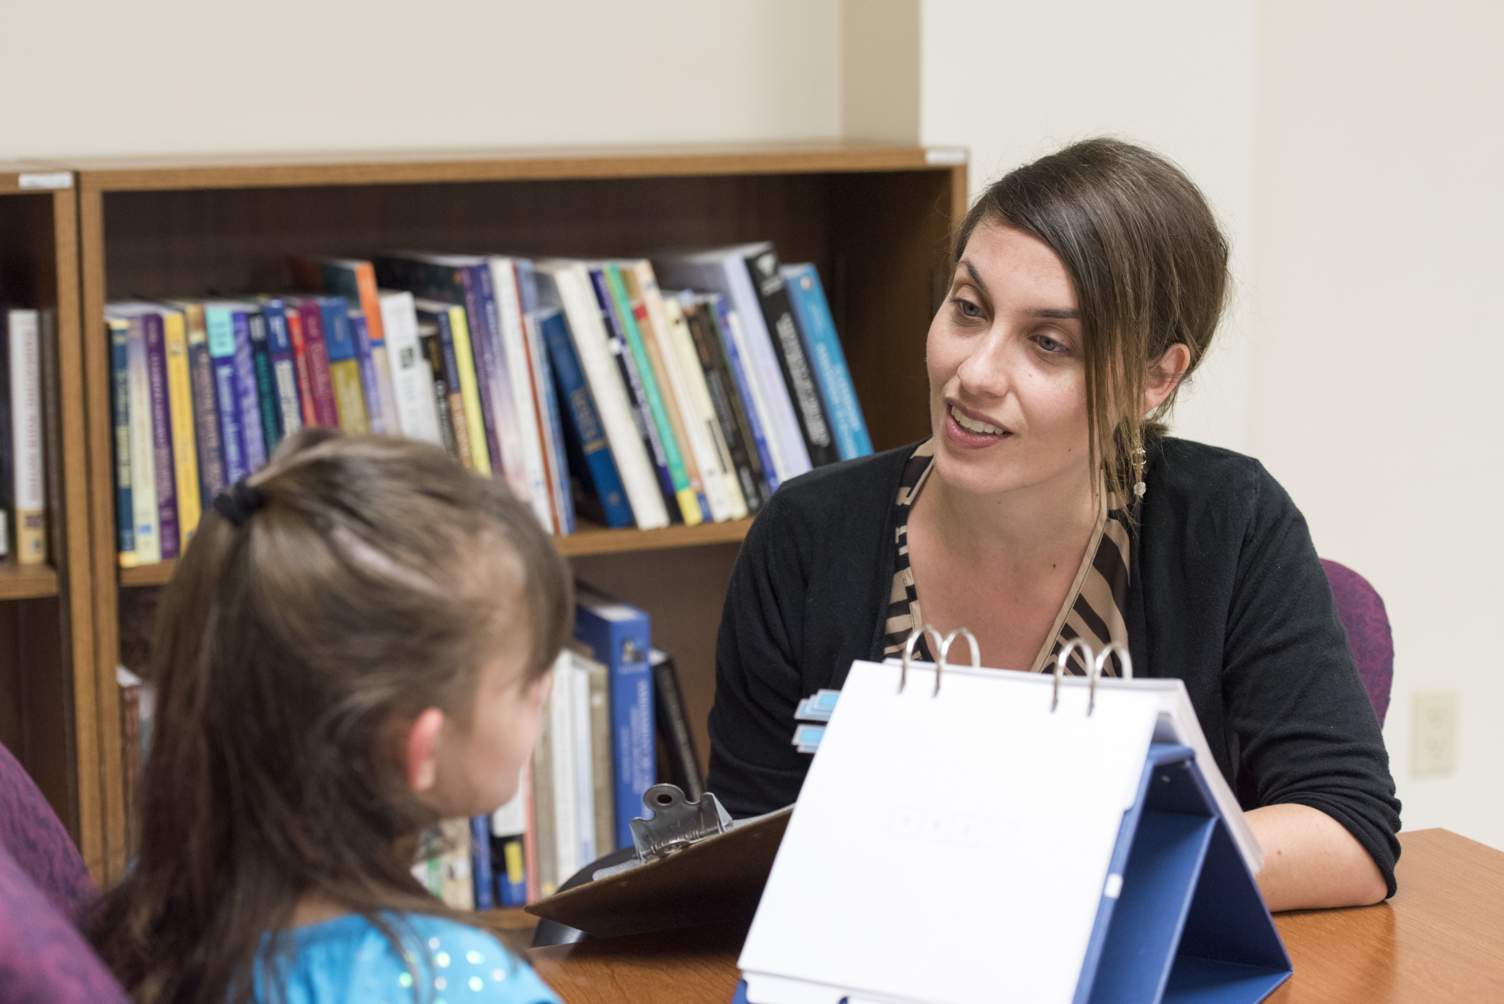 a school psychologists conducts an assessment with a young student, the school psychologist is writing on a clipboard and a small flip chart is situated on the table between the pair